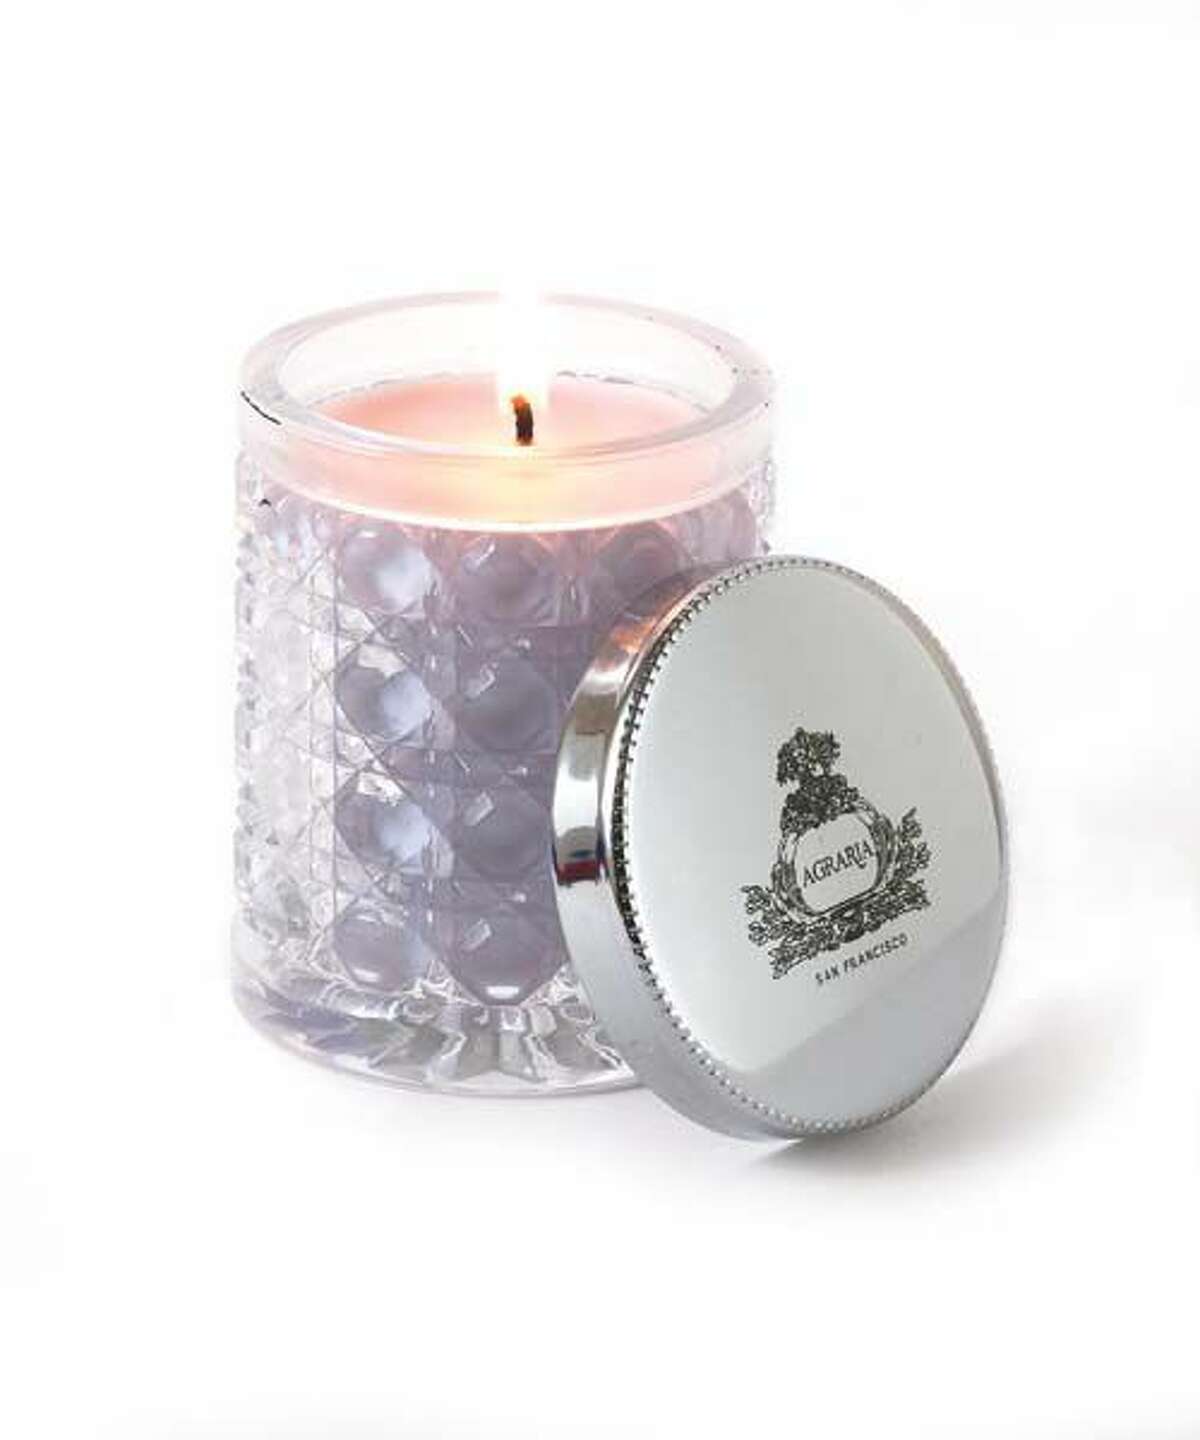 Agraria lavender and rosemary candle, $35, at D.K. Schulman Design, New Preston. www.dkschulmandesign.com